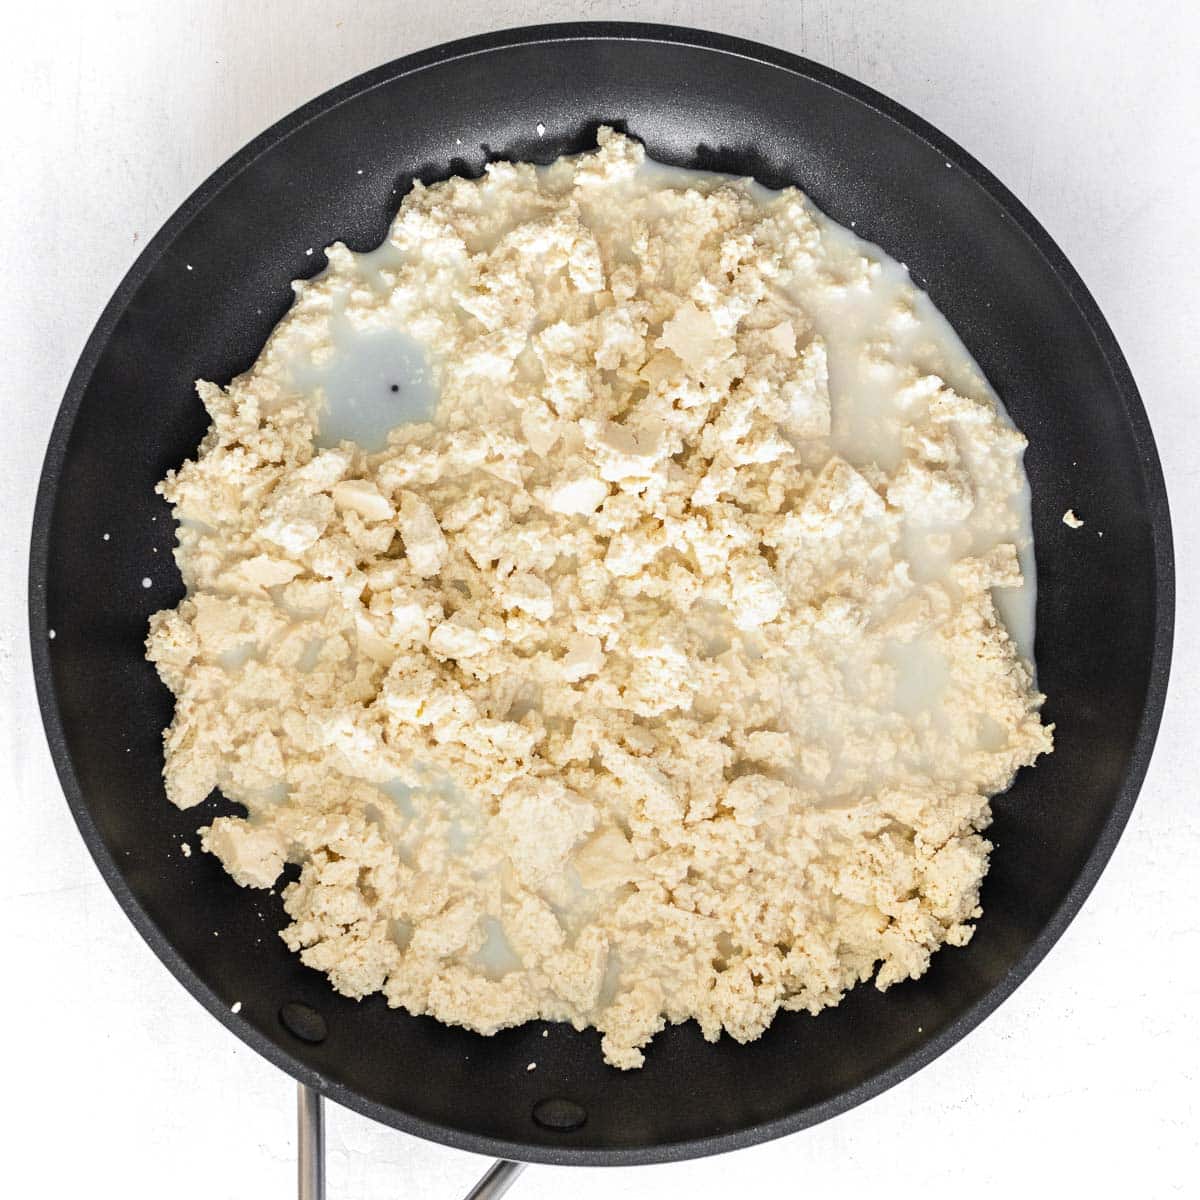 plant milk added to the crumbled tofu